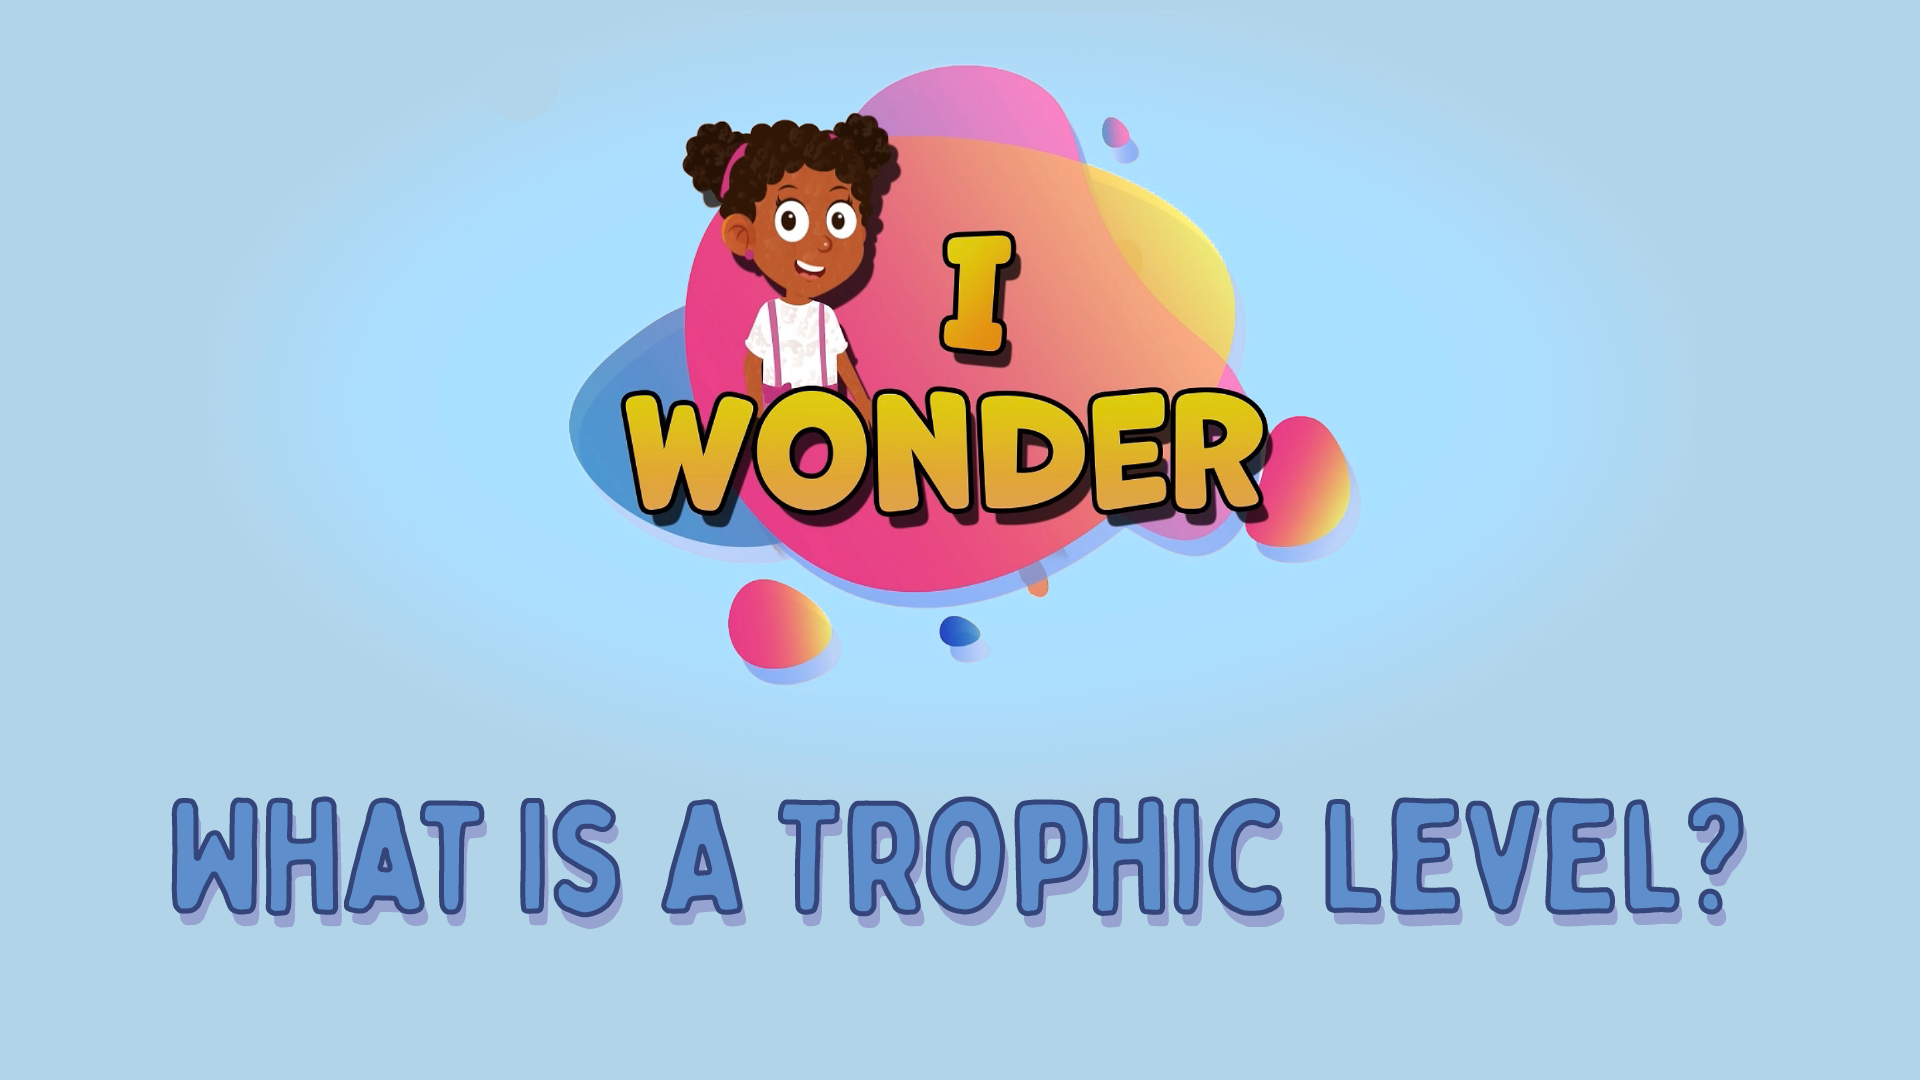 What Is A Trophic Level?